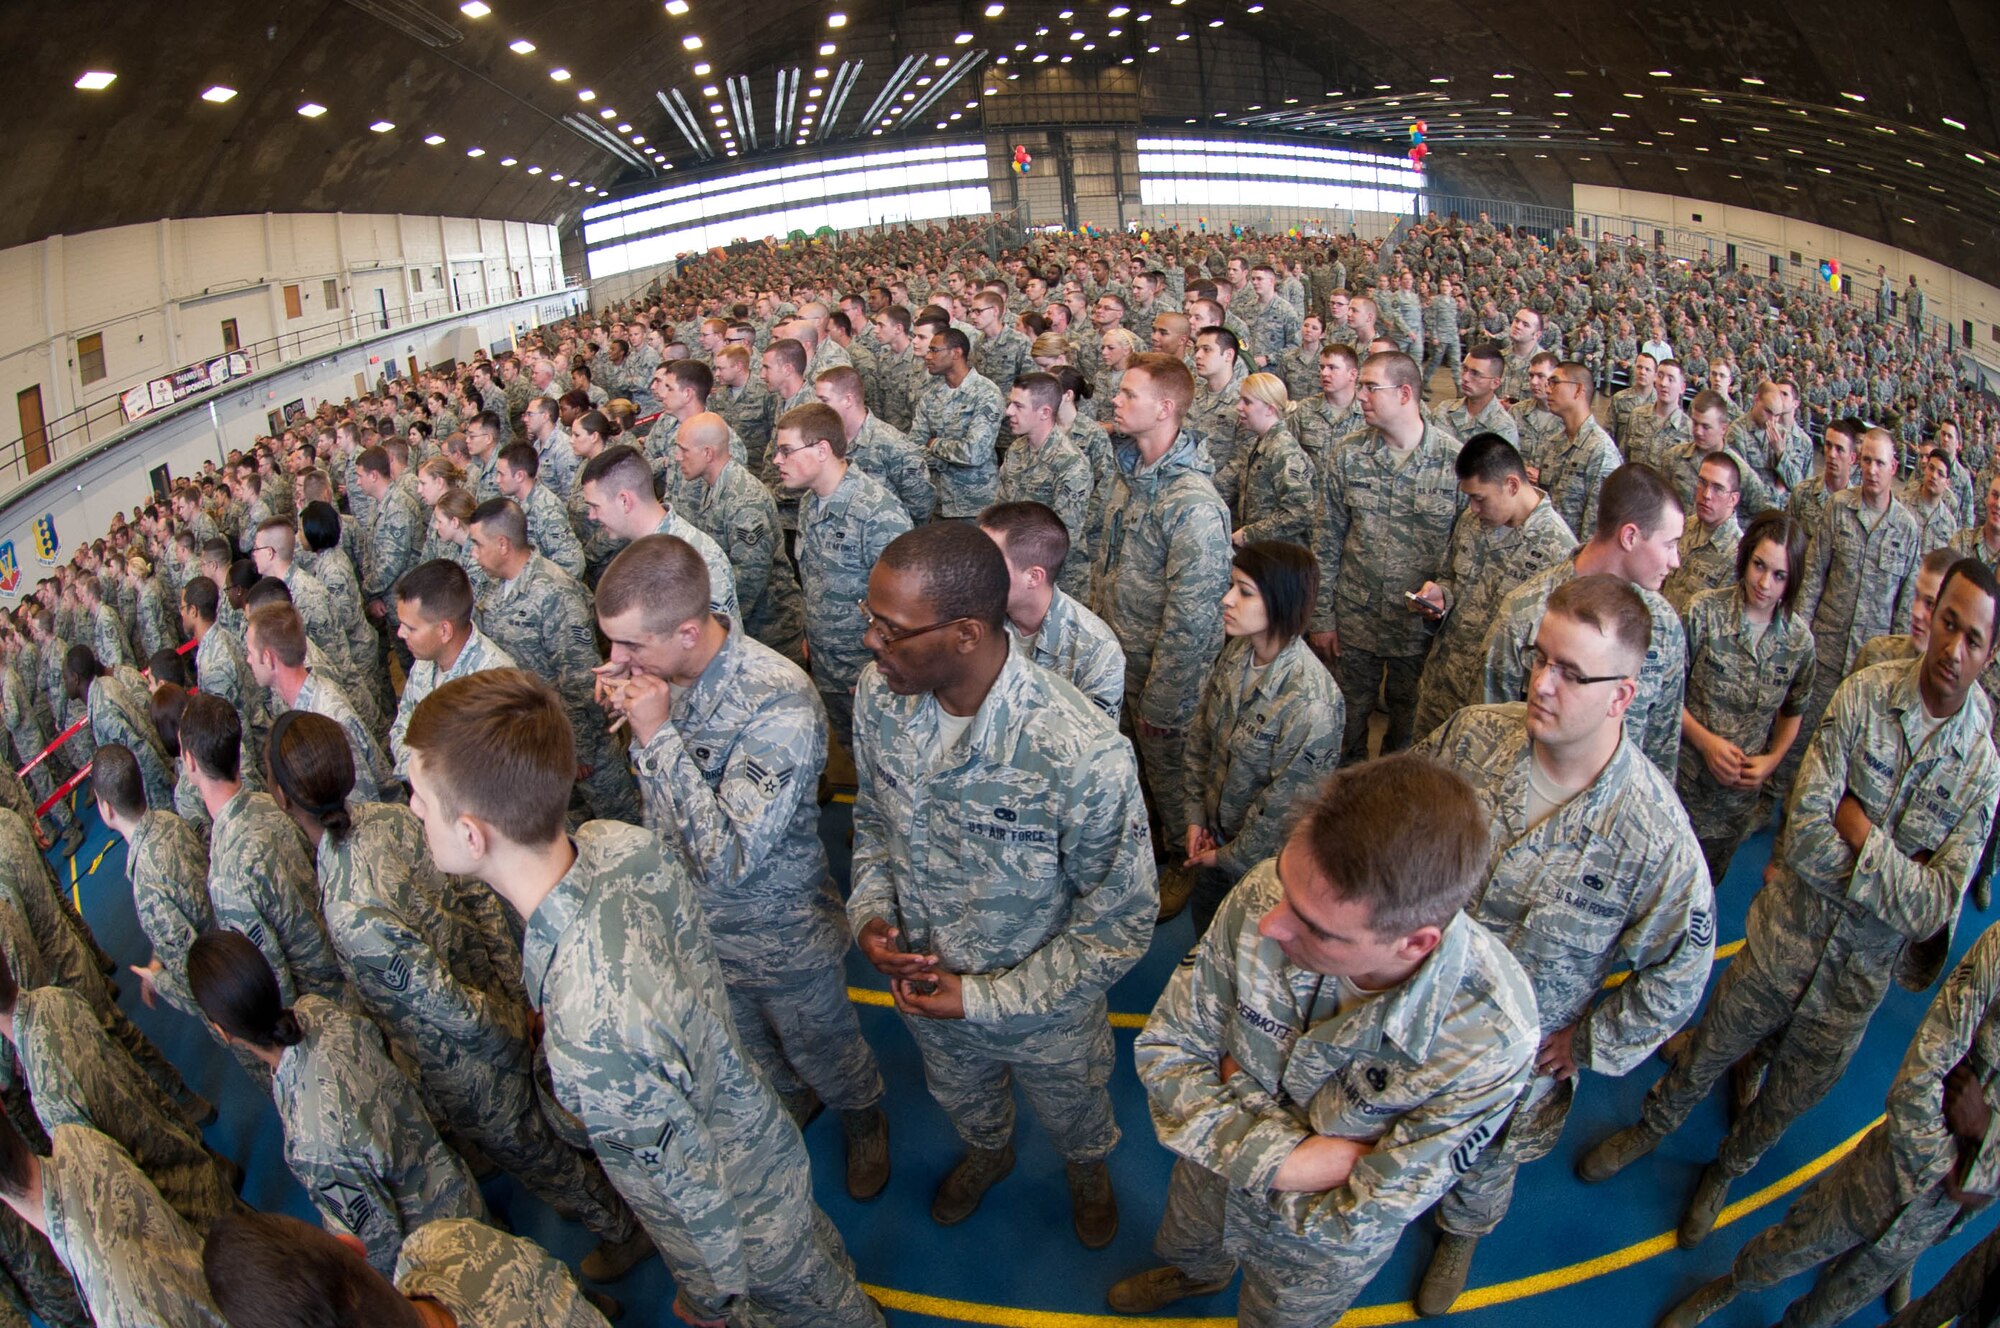 Ellsworth Airmen gather at the Pride Hangar for an Airman’s Call prior to the arrival of Gen. William M. Fraser III, commander of U.S. Transportation Command, at Ellsworth Air Force Base, S.D., May 18, 2012. General Fraser addressed those attending and touched on safety, his past experiences as commander of the 28th Bomb Wing and Ellsworth’s accomplishments. (U.S. Air Force photo by Airman 1st Class Zachary Hada/Released)